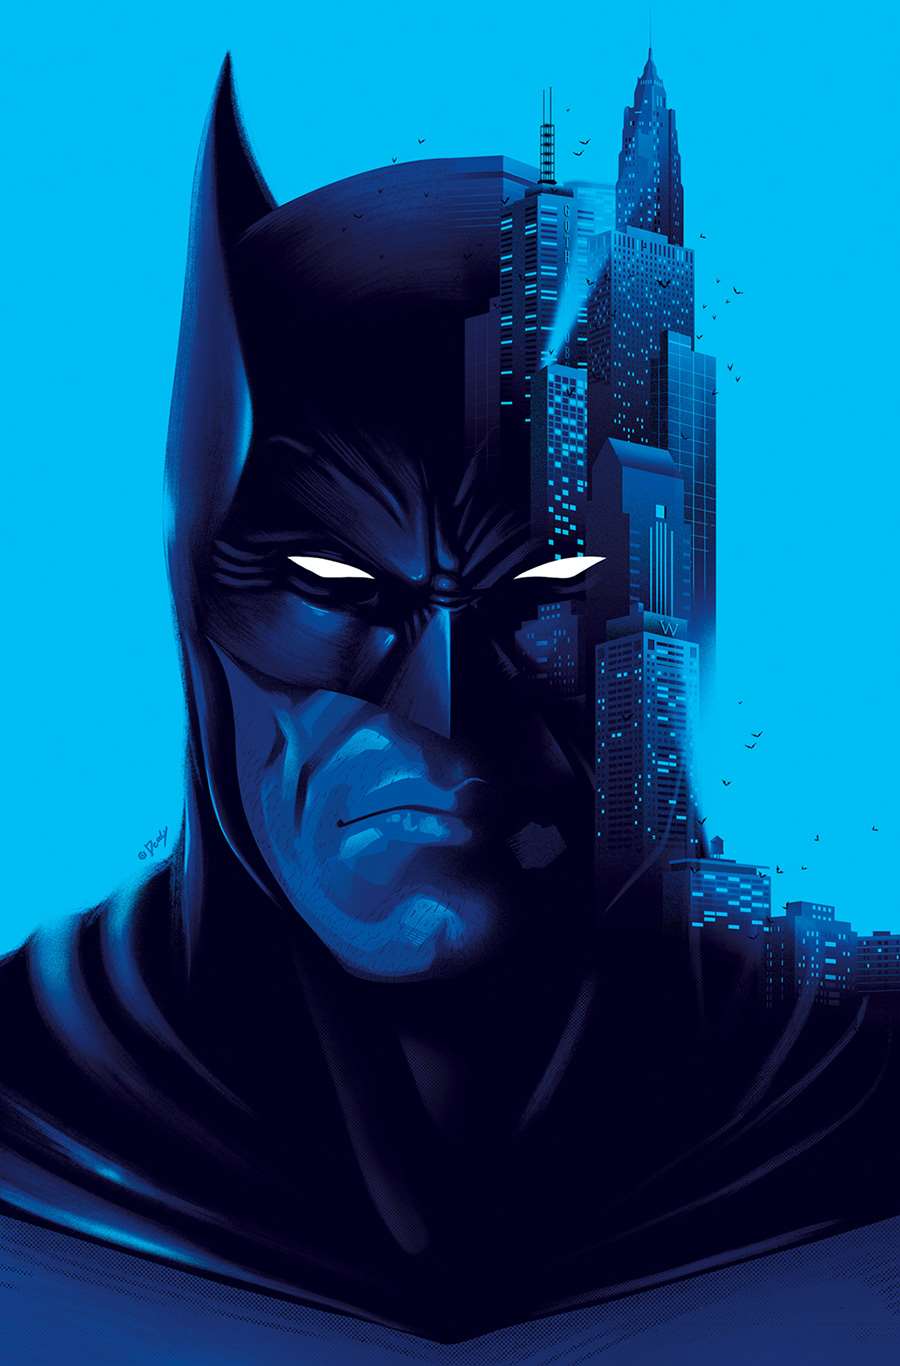 Doaly, Digital painterly film poster for Batman on blue background.